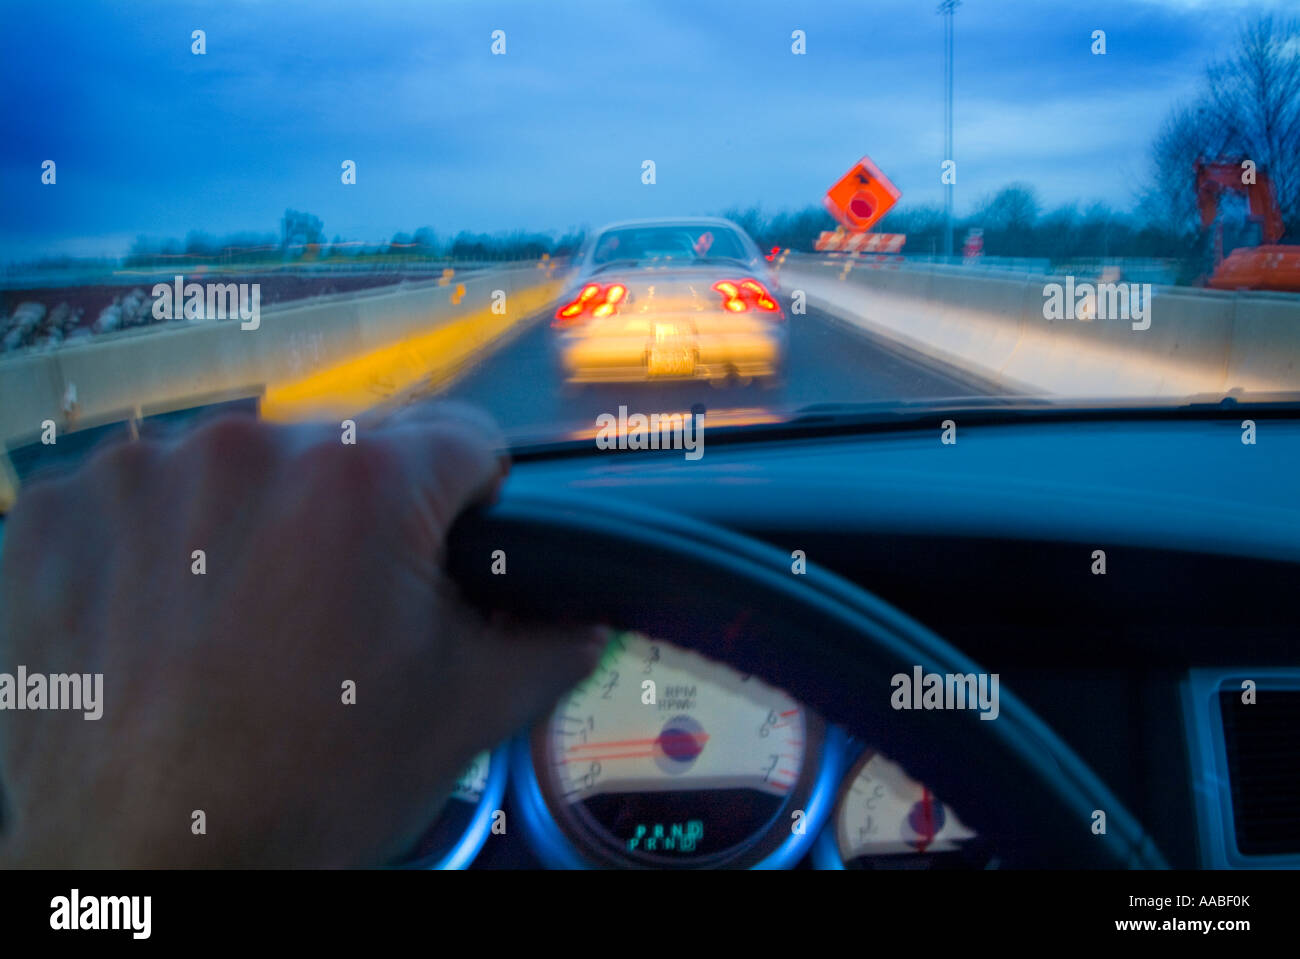 View Of Cars On Highway From Drivers Perspective With Hand On Steering Wheel, Dashboard  And Motion Blur, Philadelphia, PA USA Stock Photo